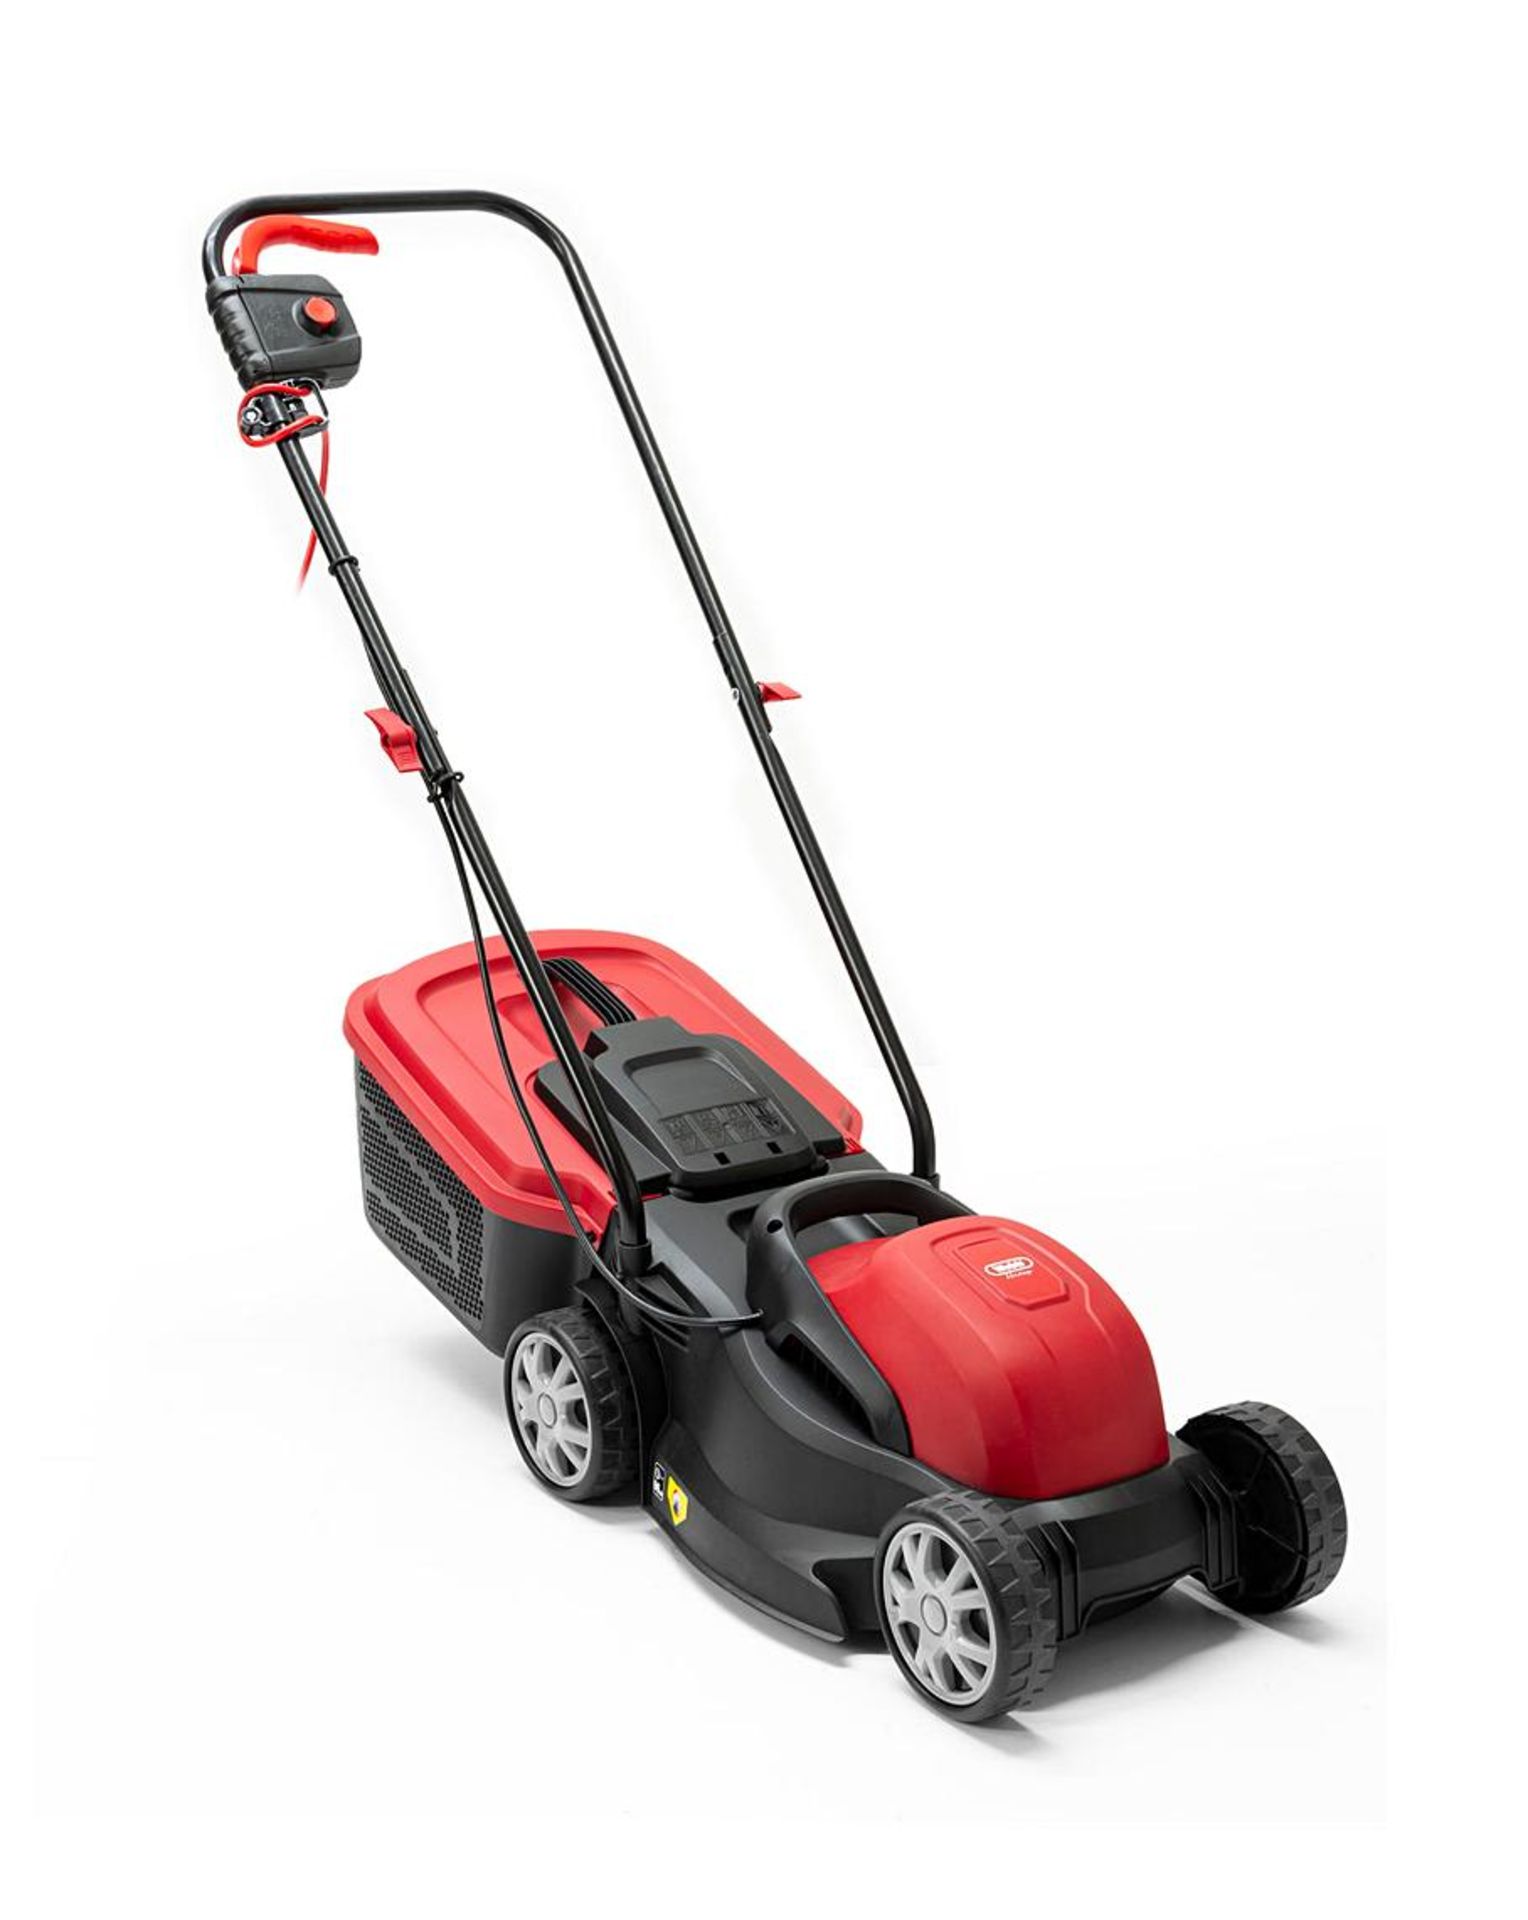 Webb Dynamic 32cm Corded Lawnmower. - SR5. RRP £119.99. Compact and easy to manoeuvre, the Webb